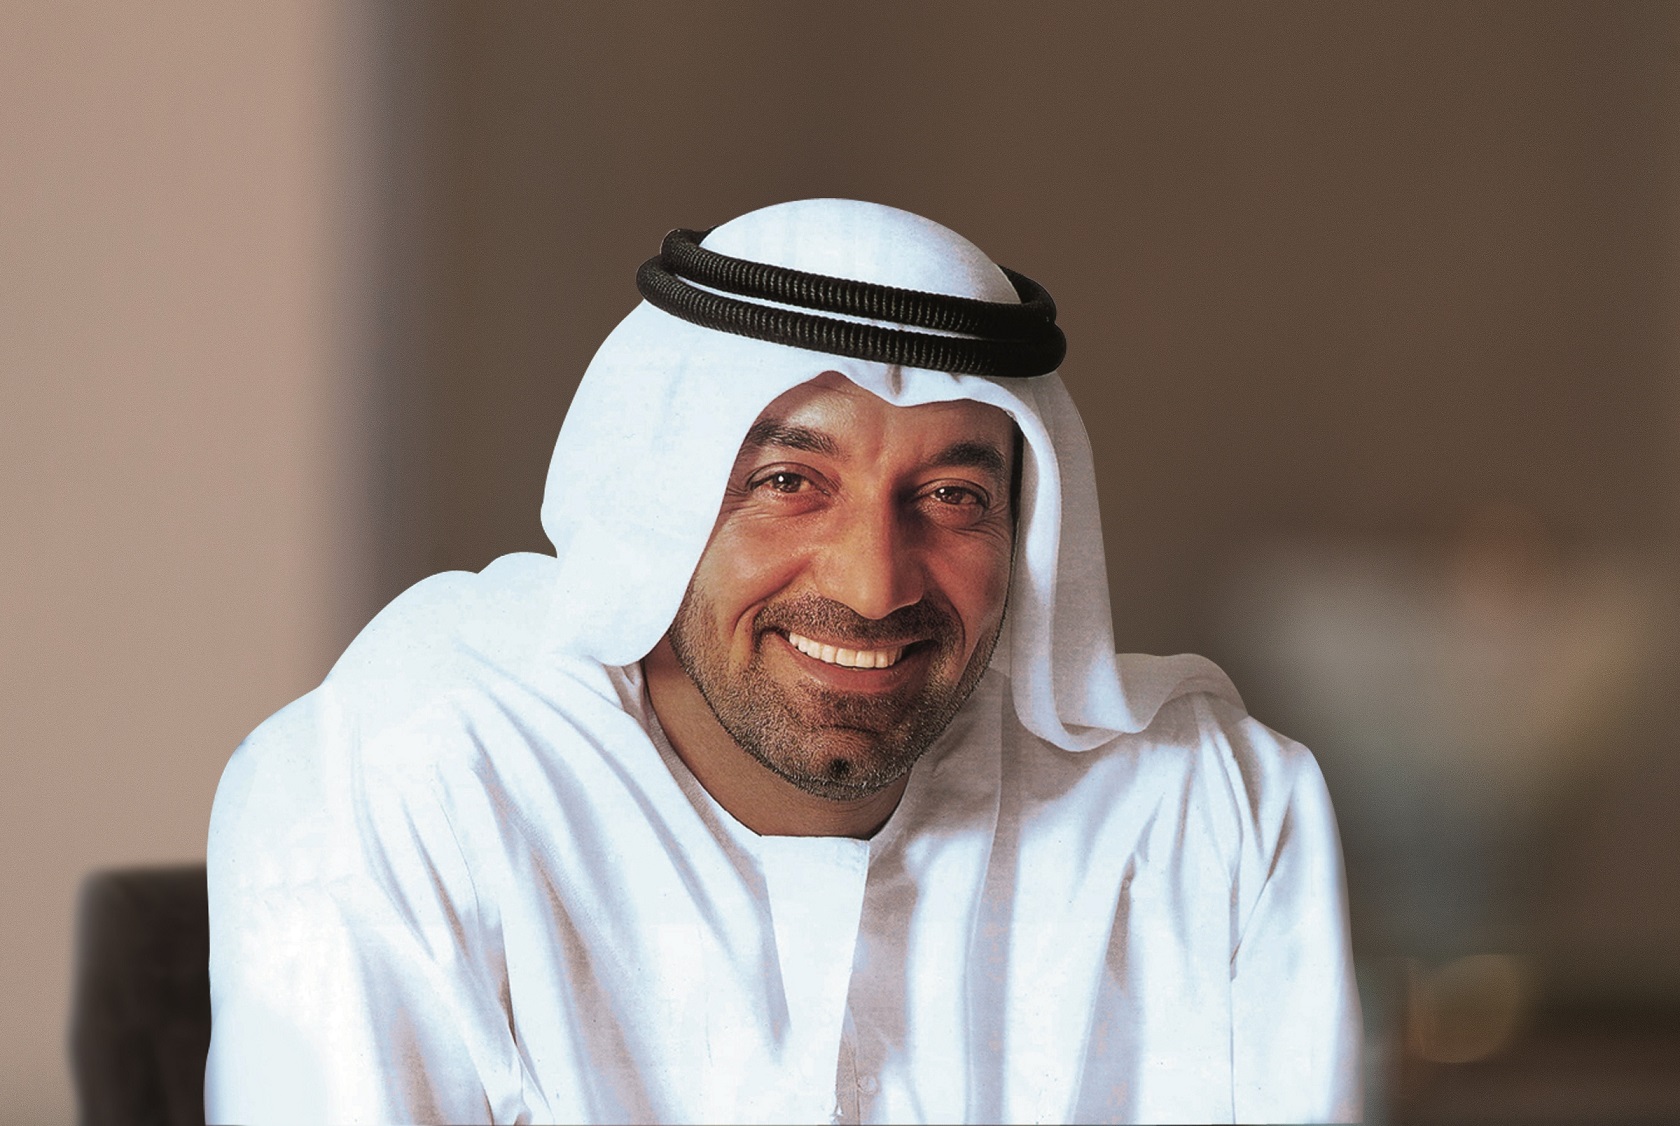 Graduating Class of 2022 at MBRU To Be Named ‘Class of Khalifa’ in Memory of the Late UAE President, HH Sheikh Khalifa Bin Zayed